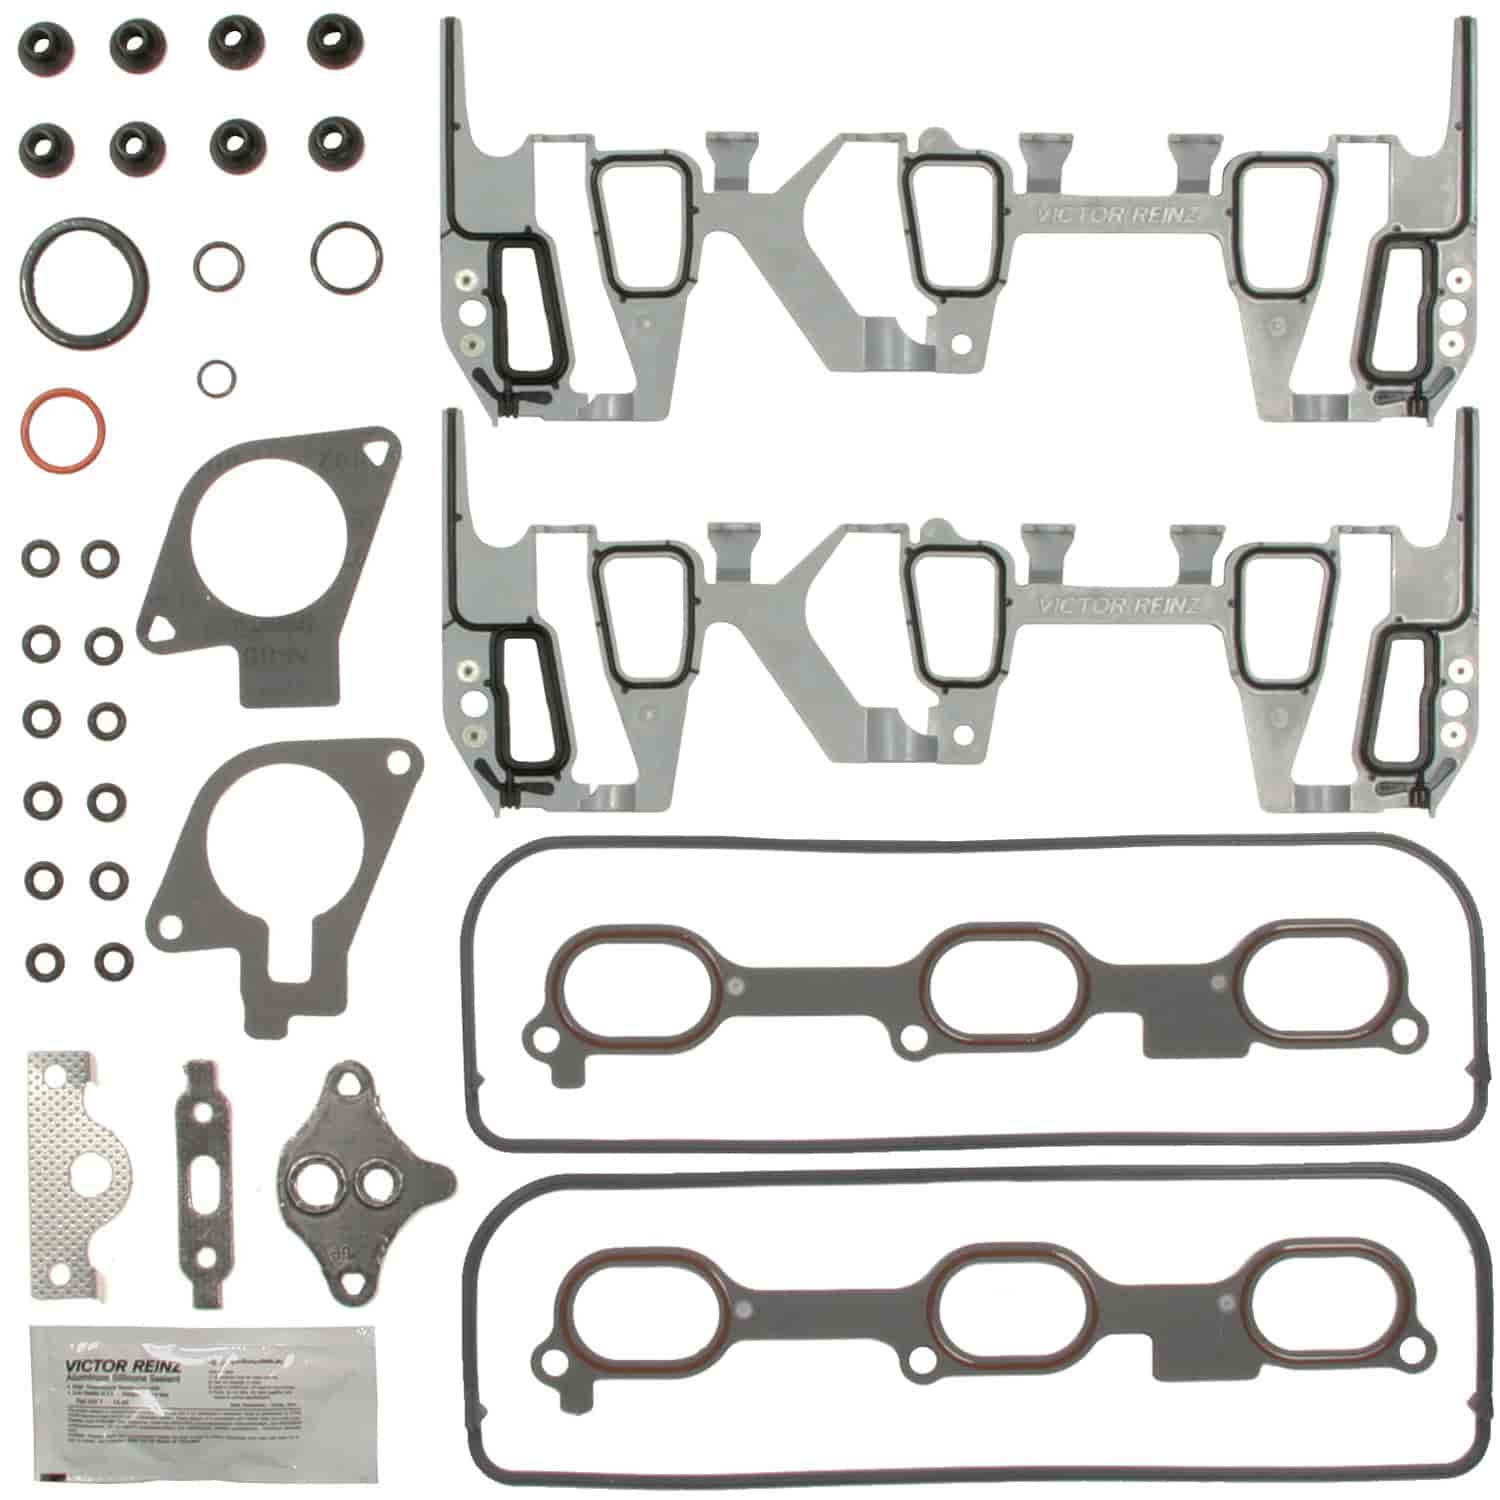 Intake Manifold Installation Kit 1996-2005 Buick/Chevy/Olds/Pontiac with V6 3.1/3.4L